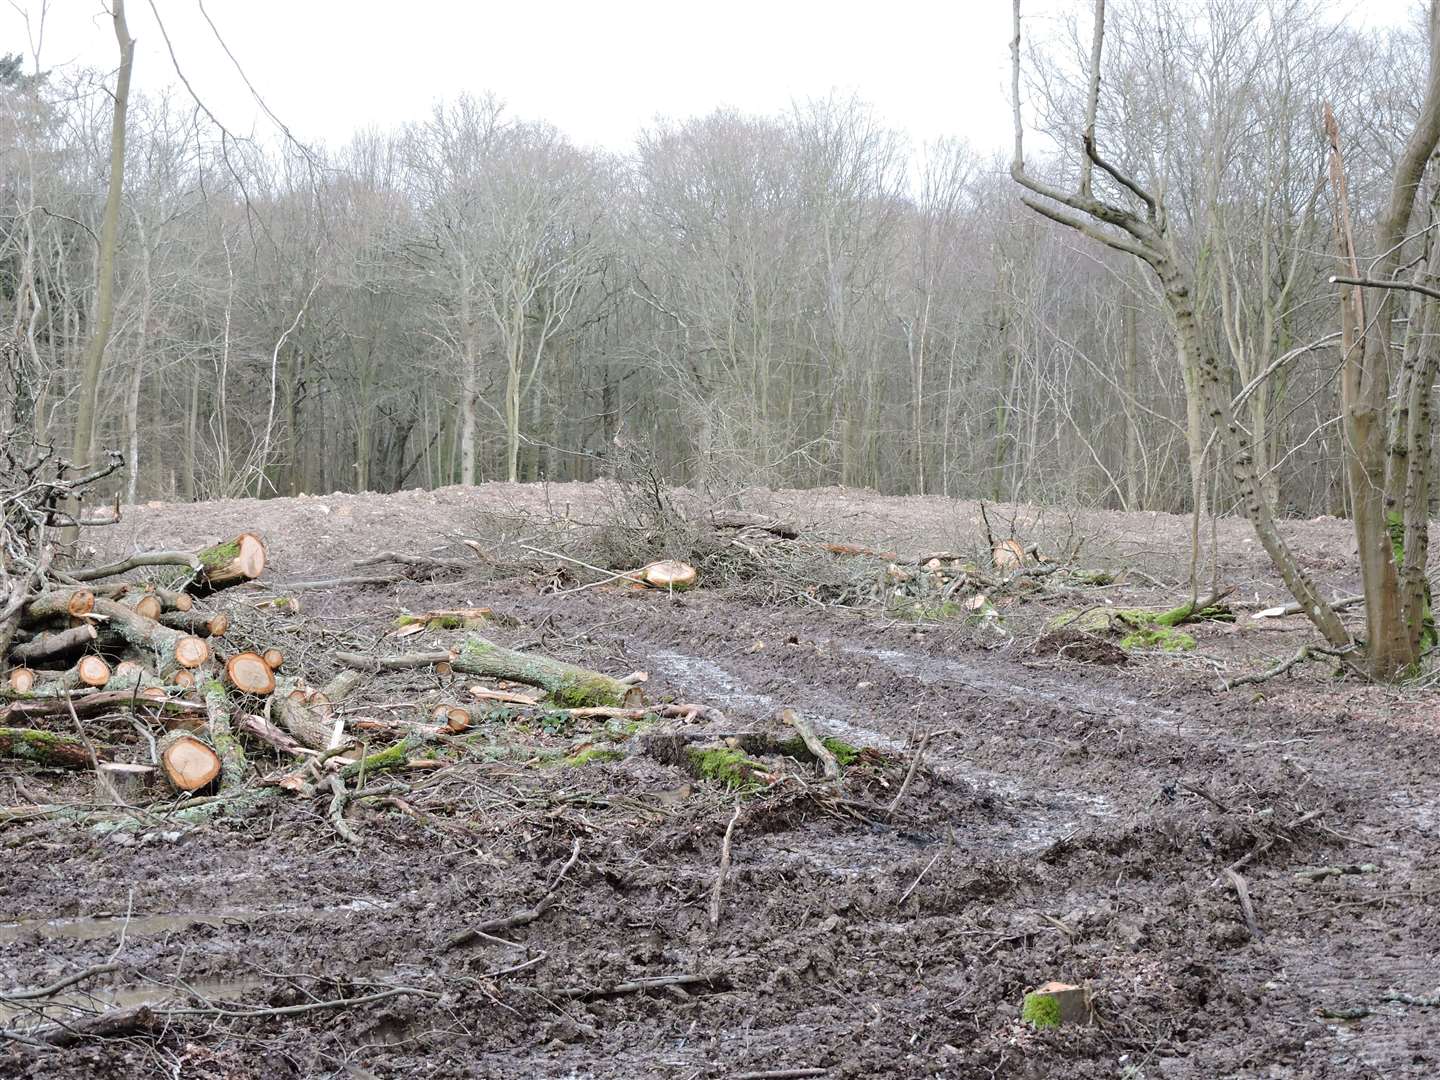 Vast areas of land have been cleared of trees